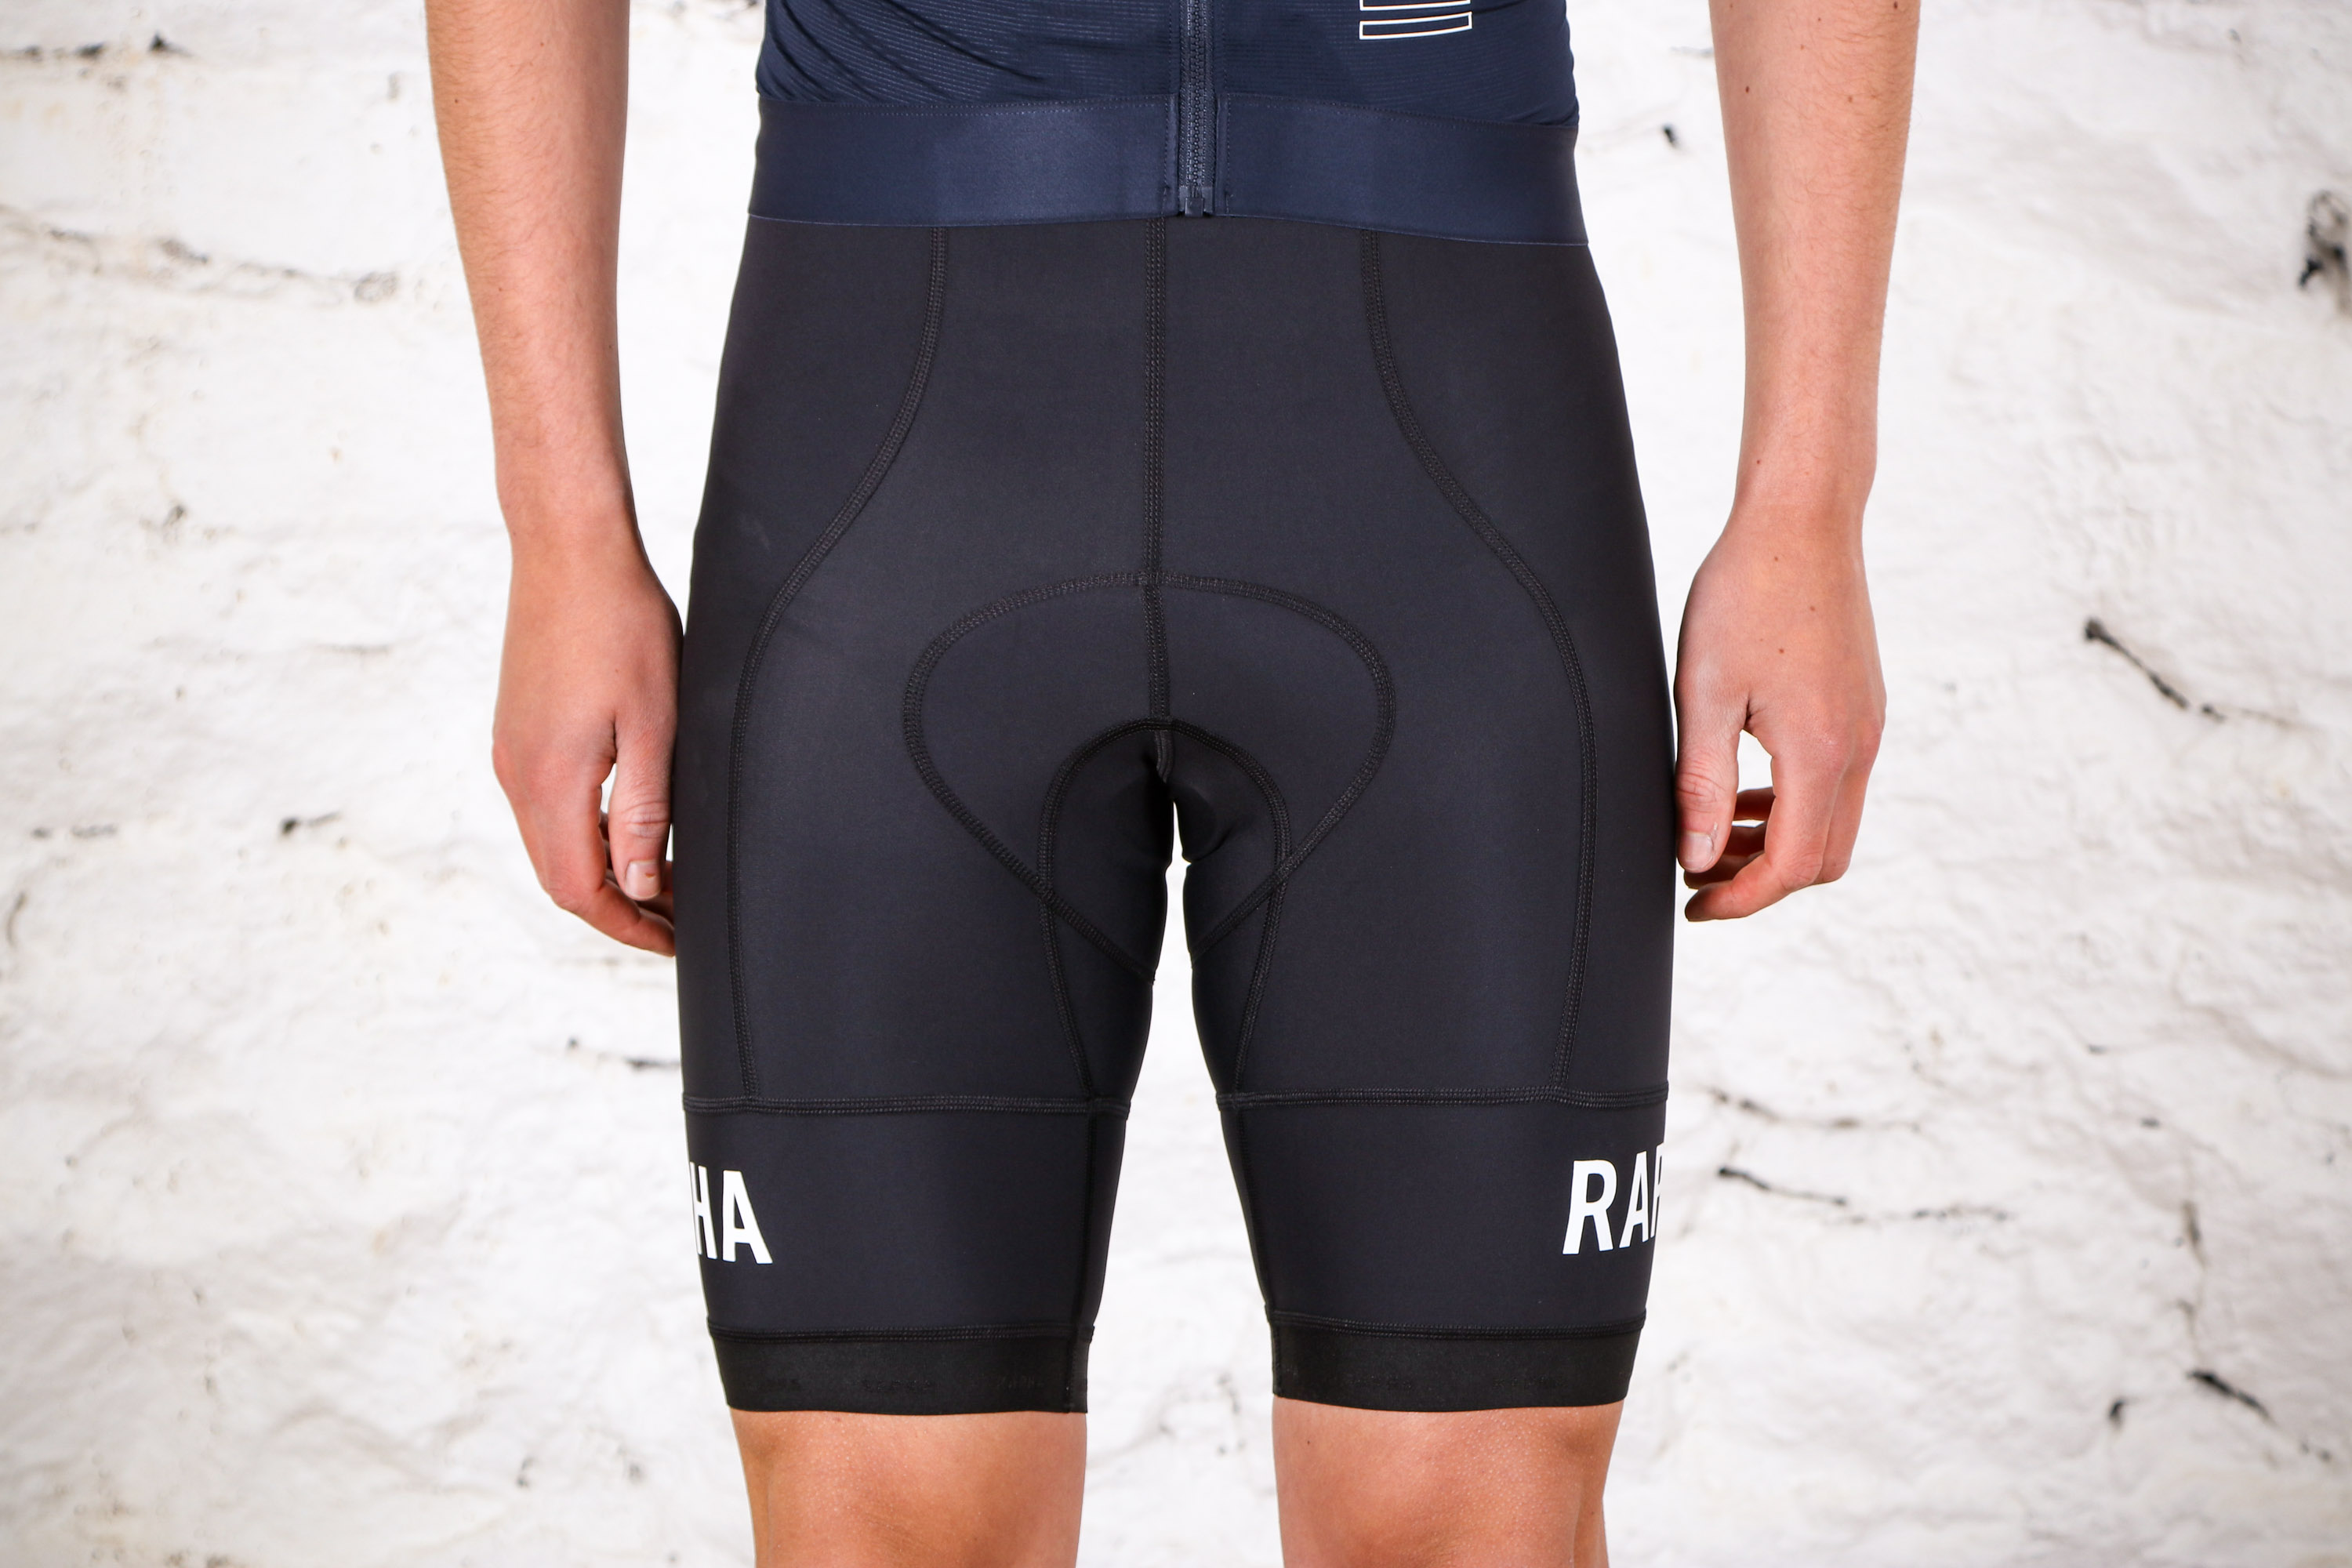 discount rapha cycling clothing